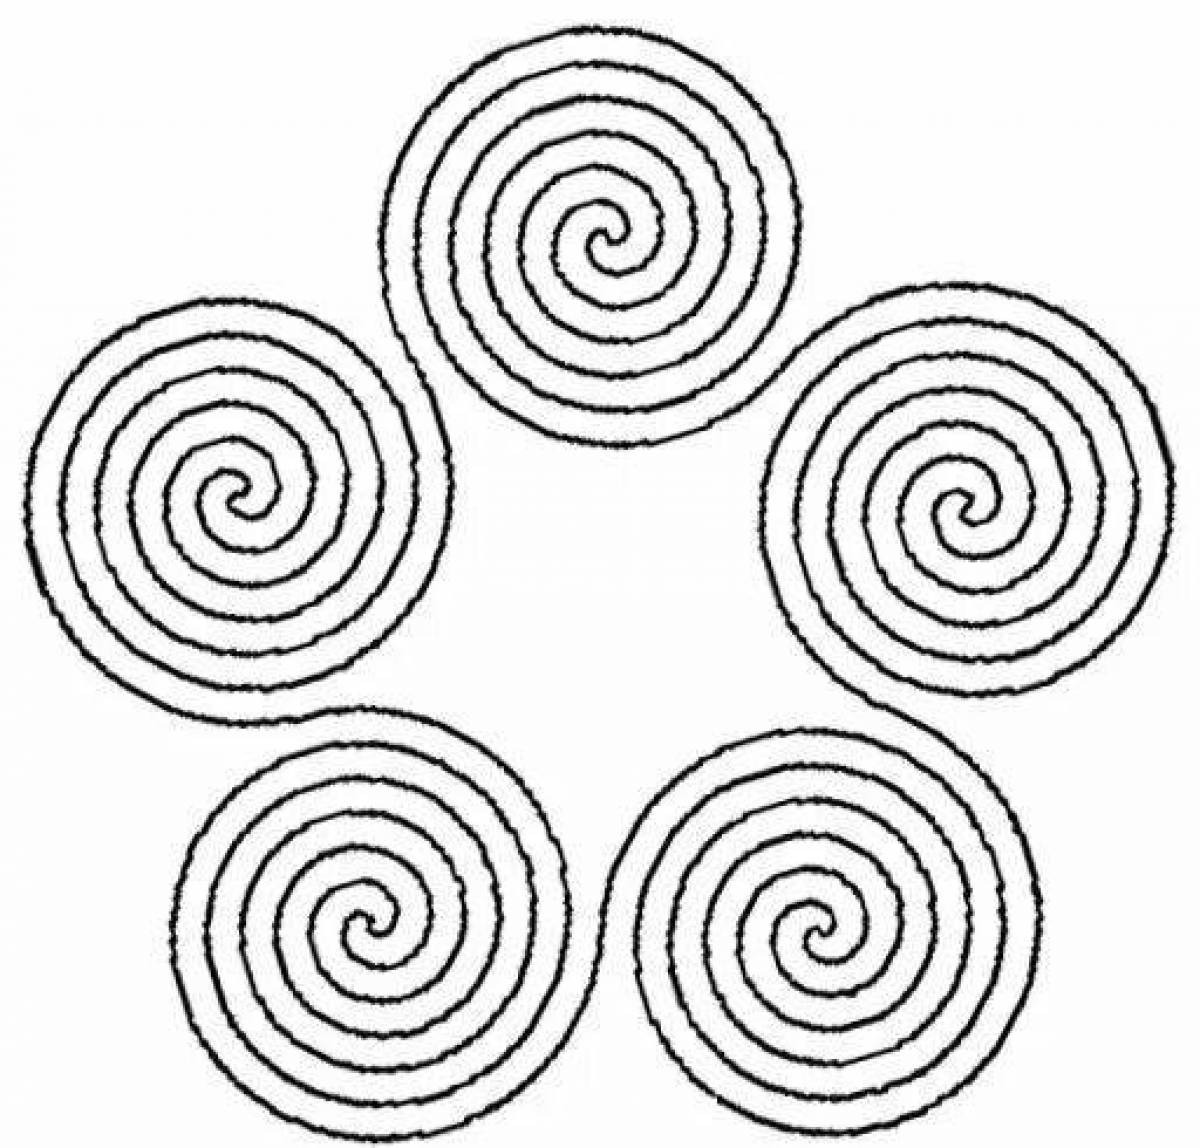 Amazing spiral in a circle coloring book